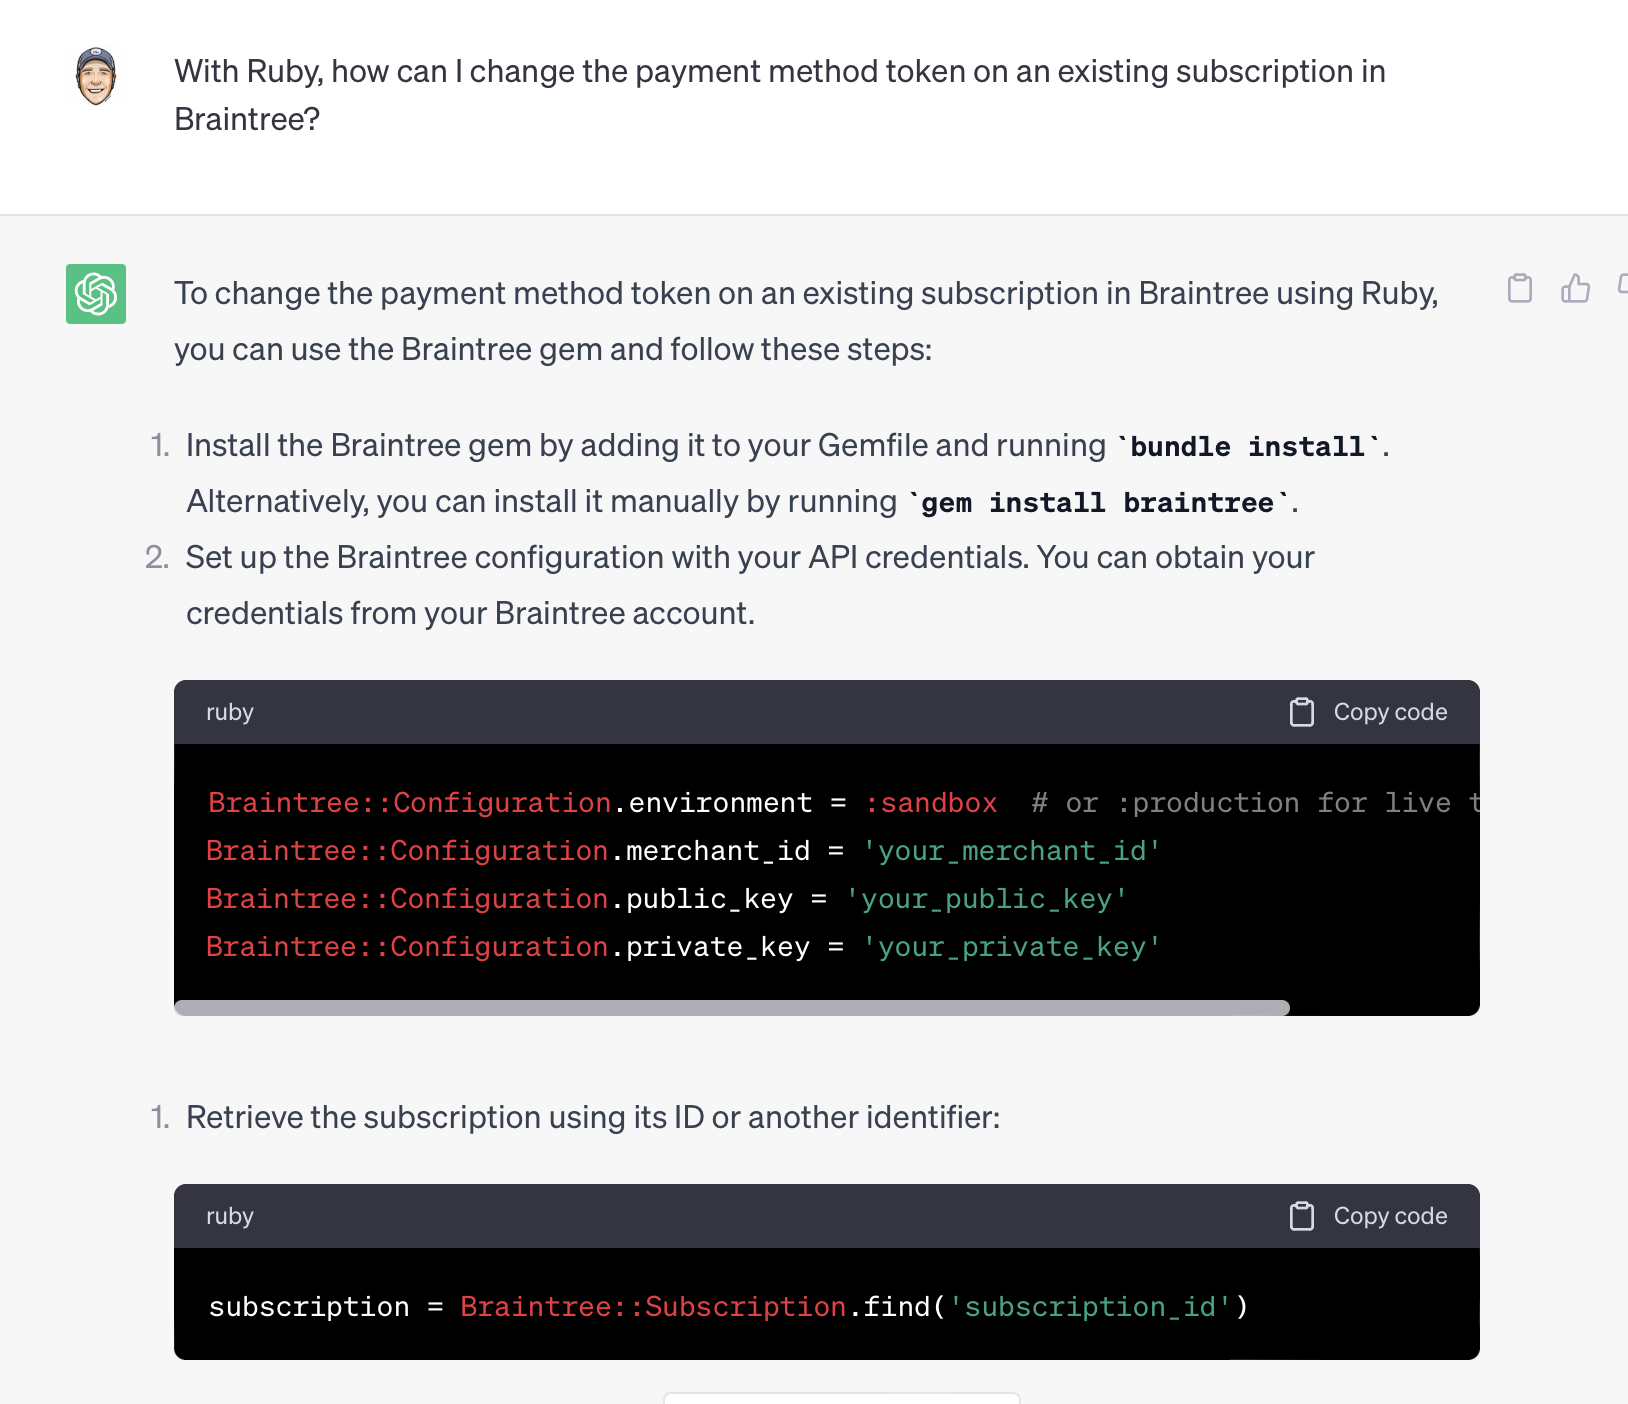 Code showing how to update the payment method on a subscription in Braintree